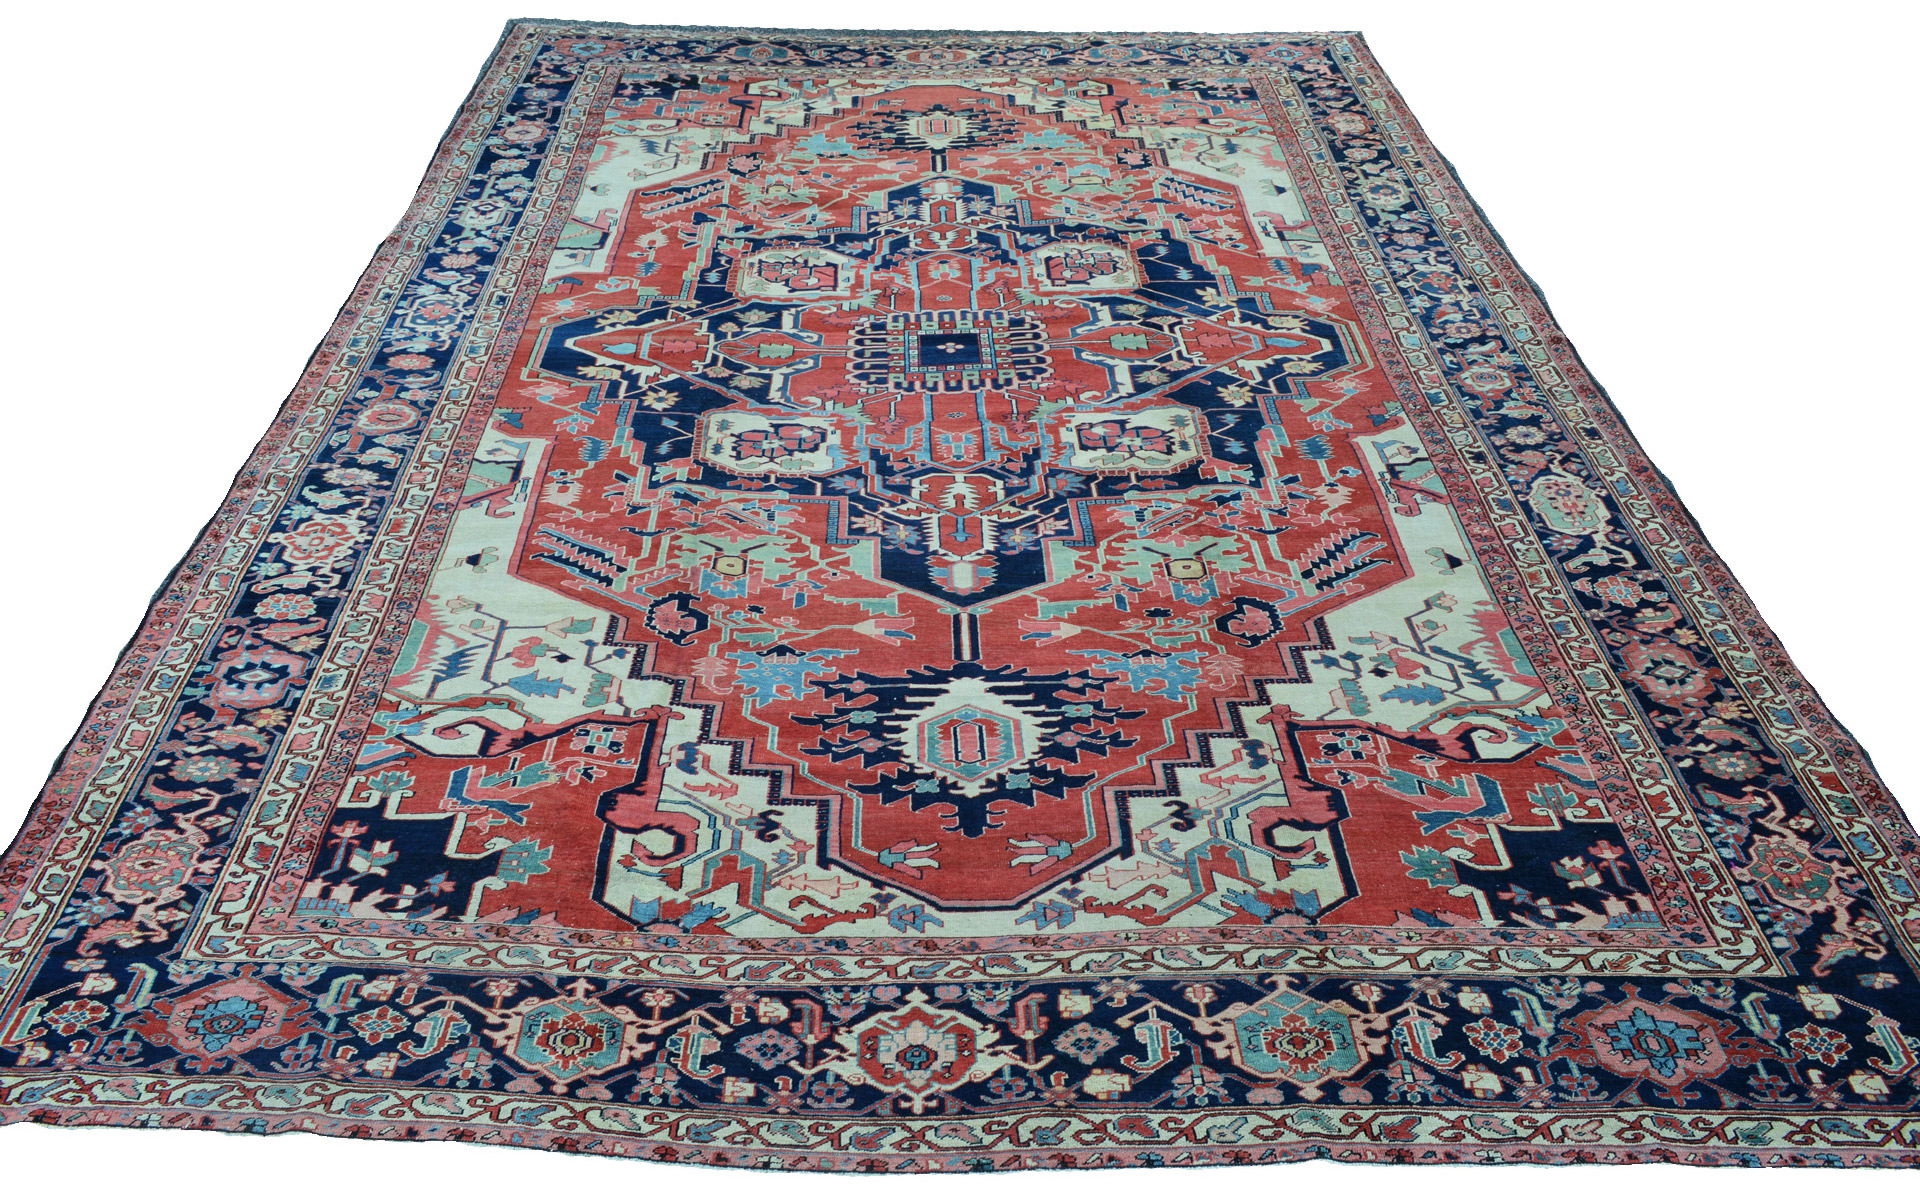 An antique northwest Persian Heriz carpet of the Serapi type with a brick red field and navy medallion.